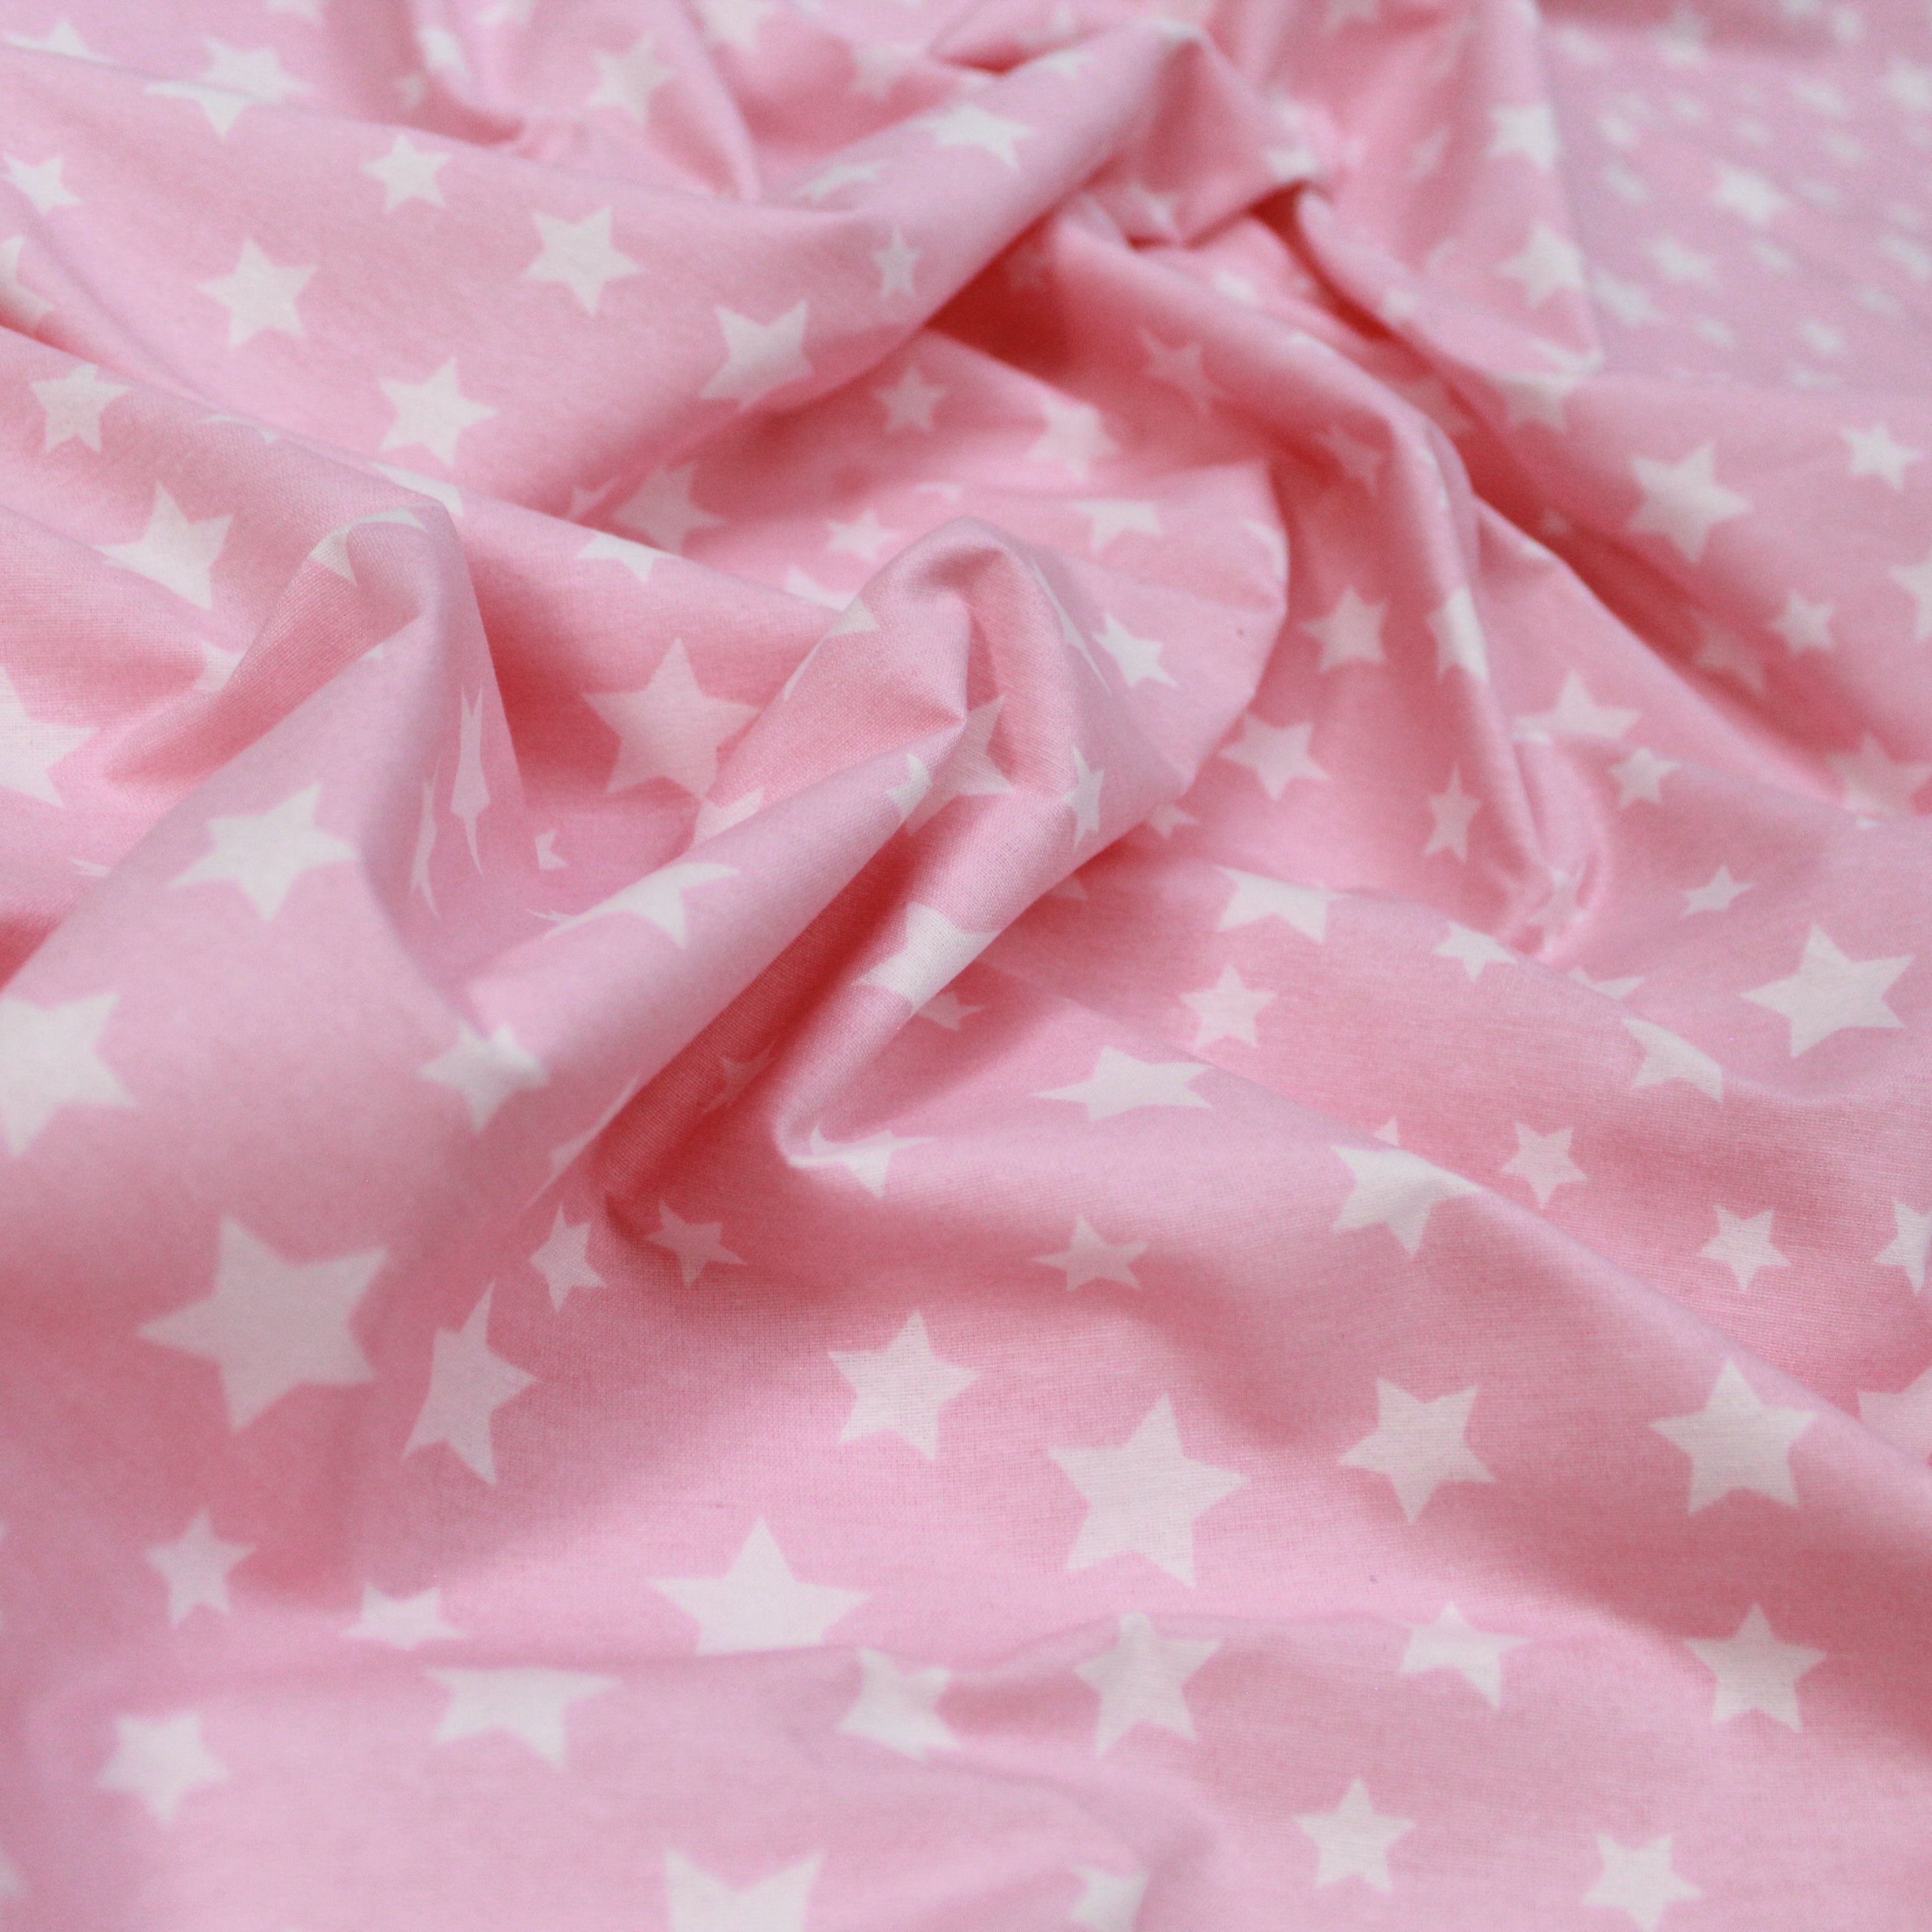 Premium Quality Super Wide Cotton Blend Sheeting "Little White Stars" 94" Wide Pink